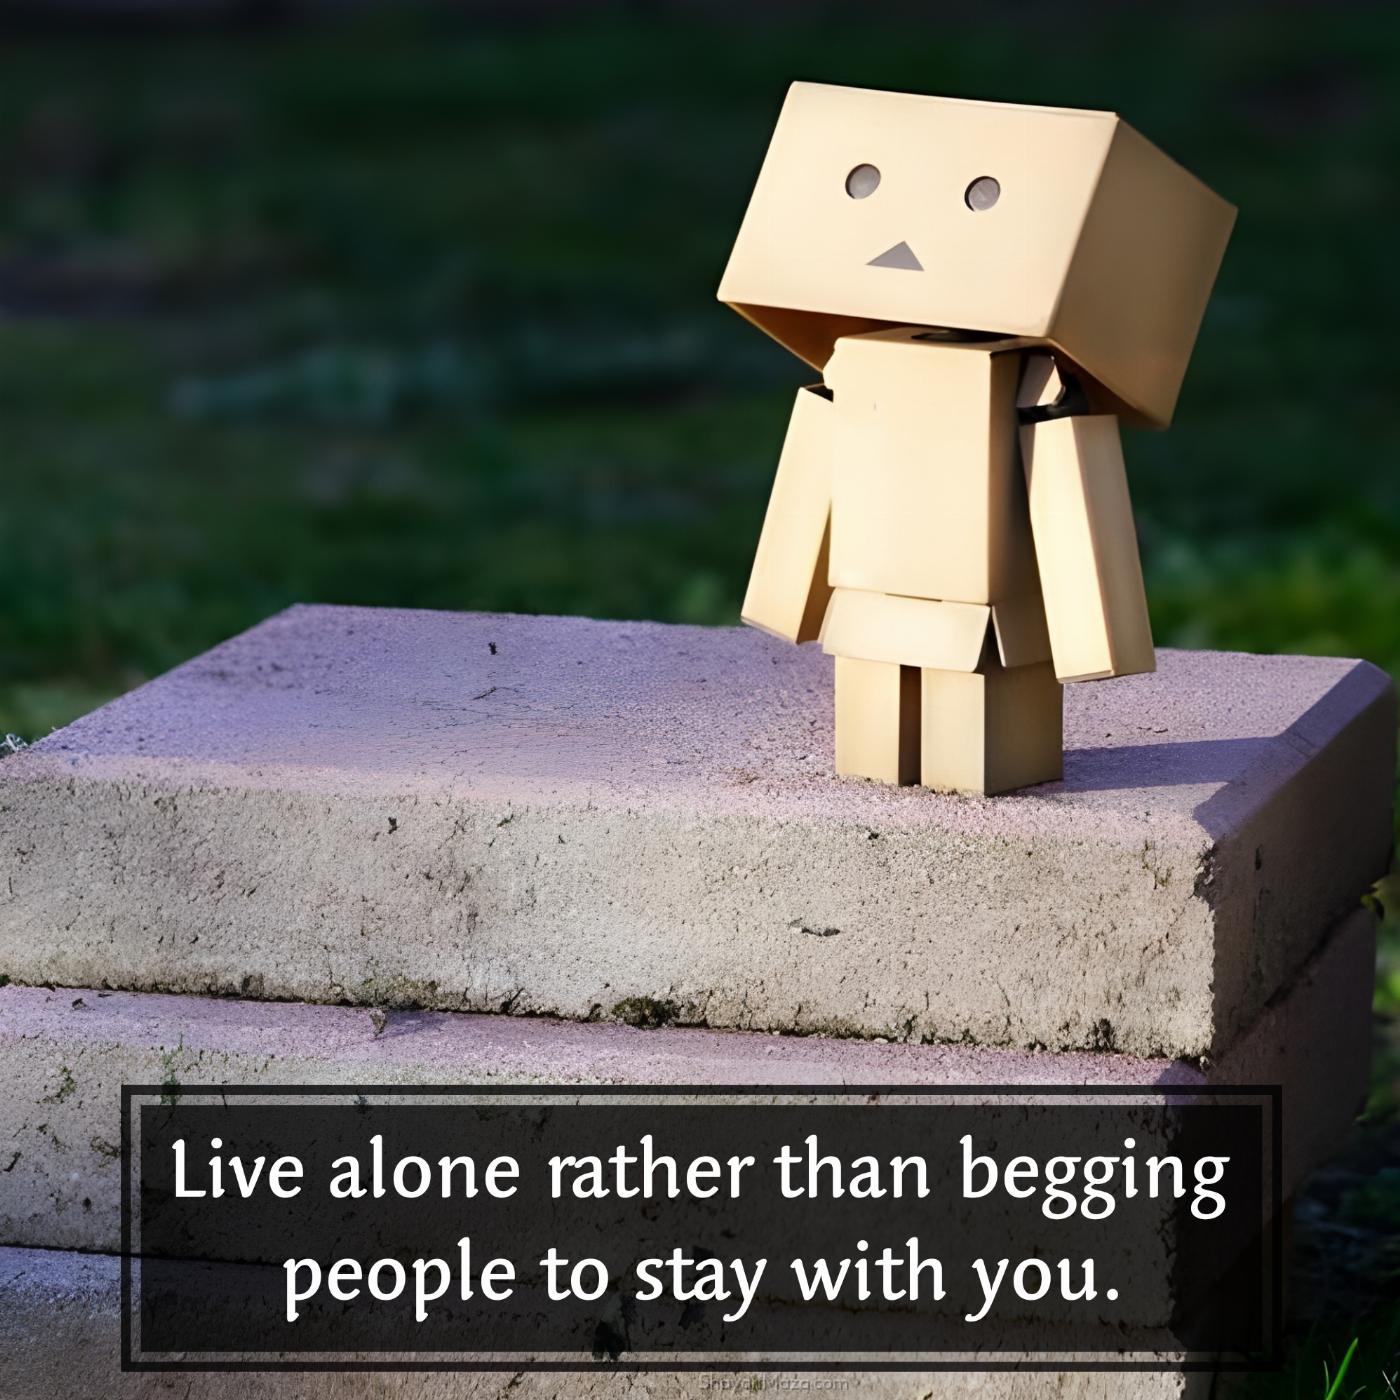 Live alone rather than begging people to stay with you